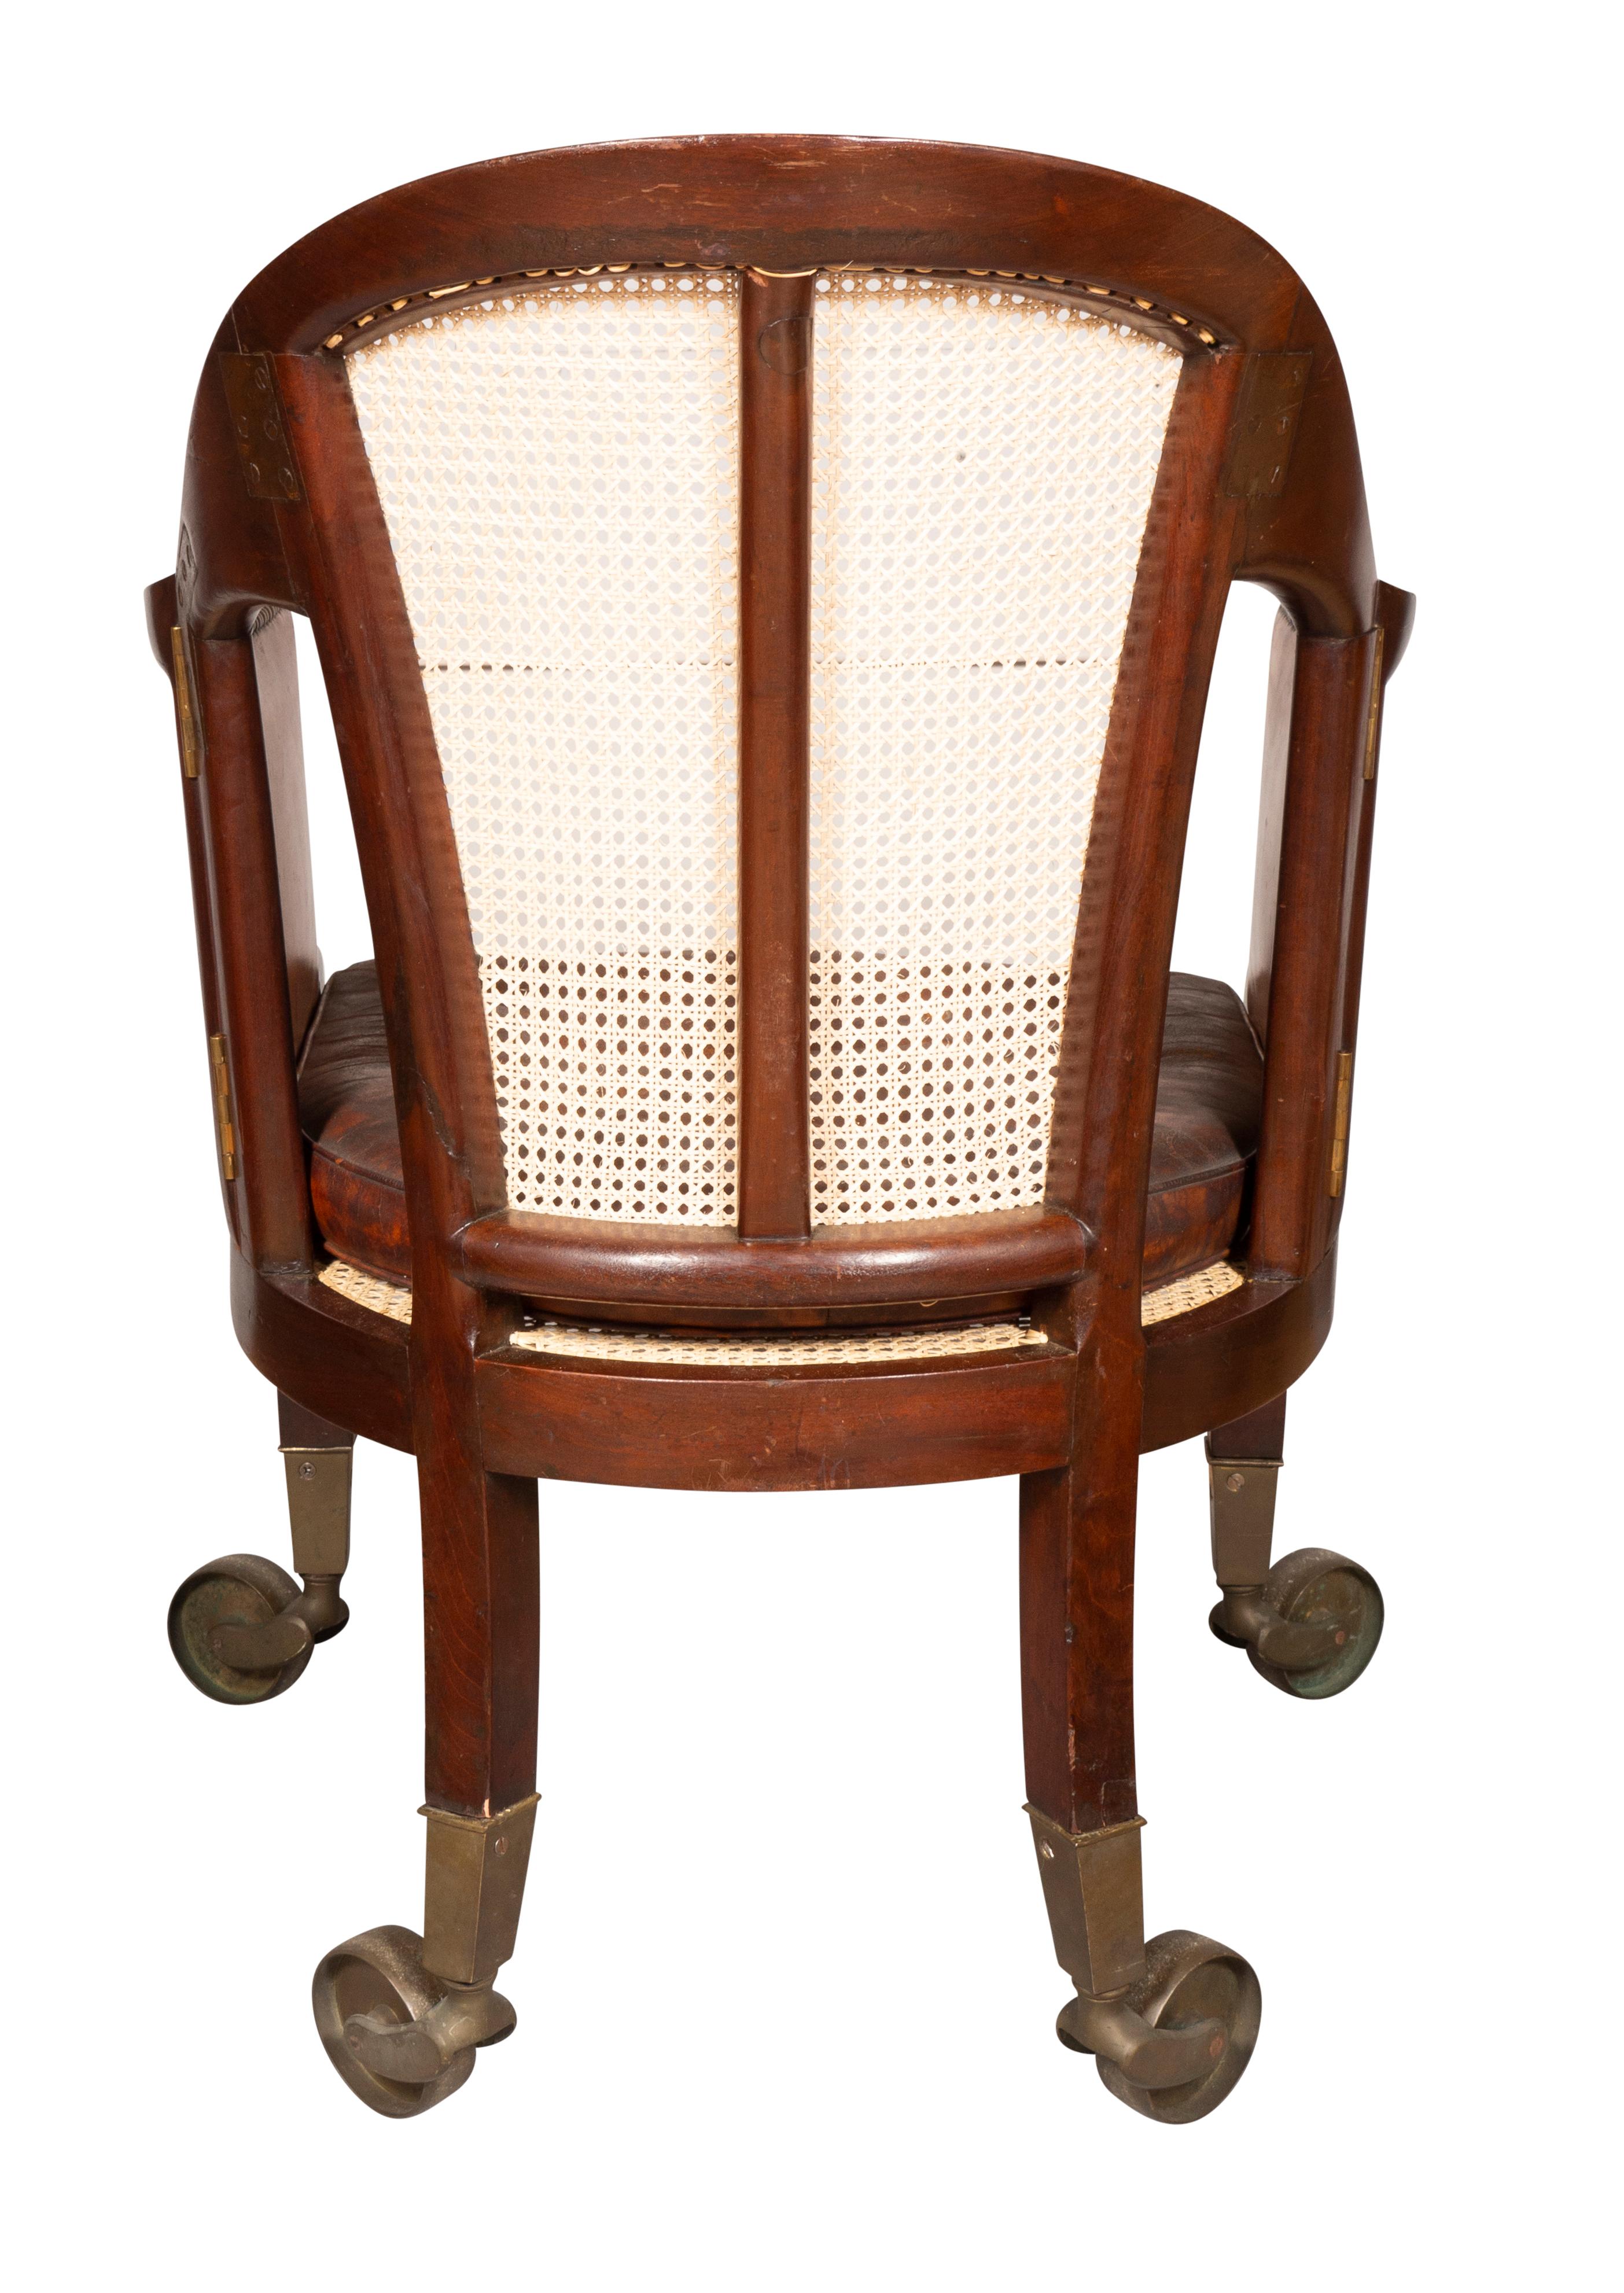 Mid-19th Century Unusual Regency Mahogany and Brass Campaign Chair For Sale